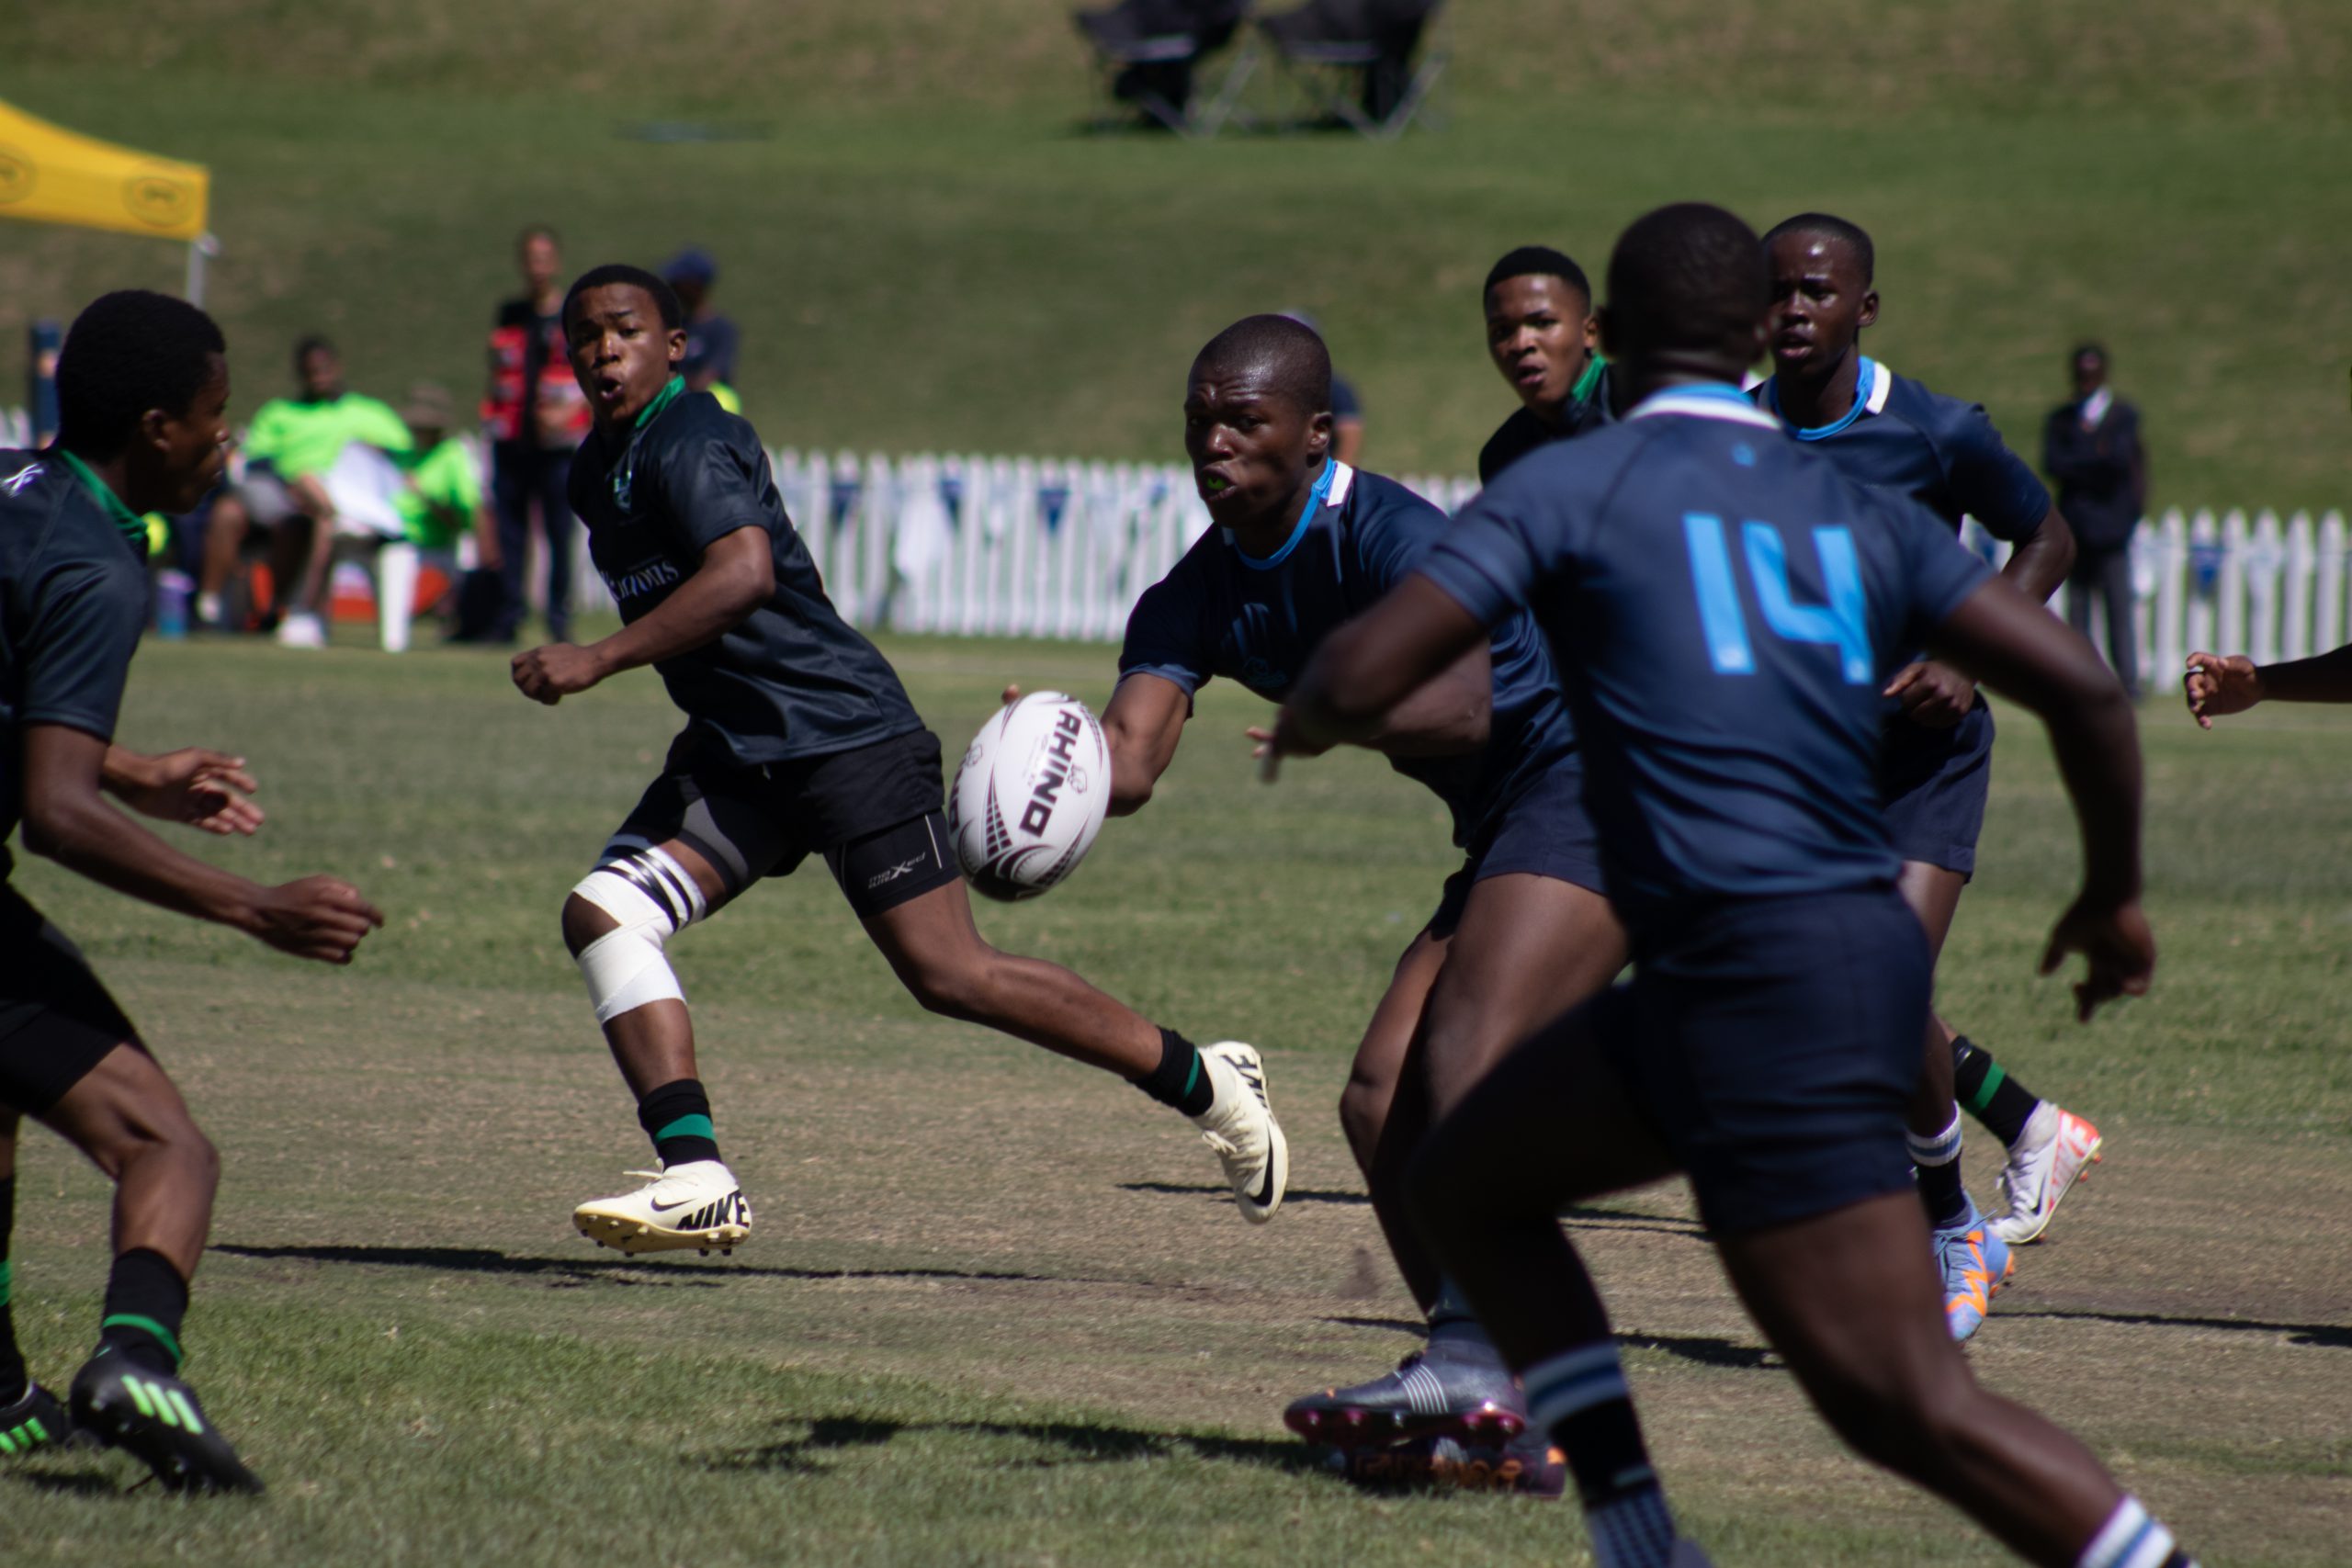 Cambridge High school vs Muir College at the Graeme College rugby festival. Photo: Rikie Lai.